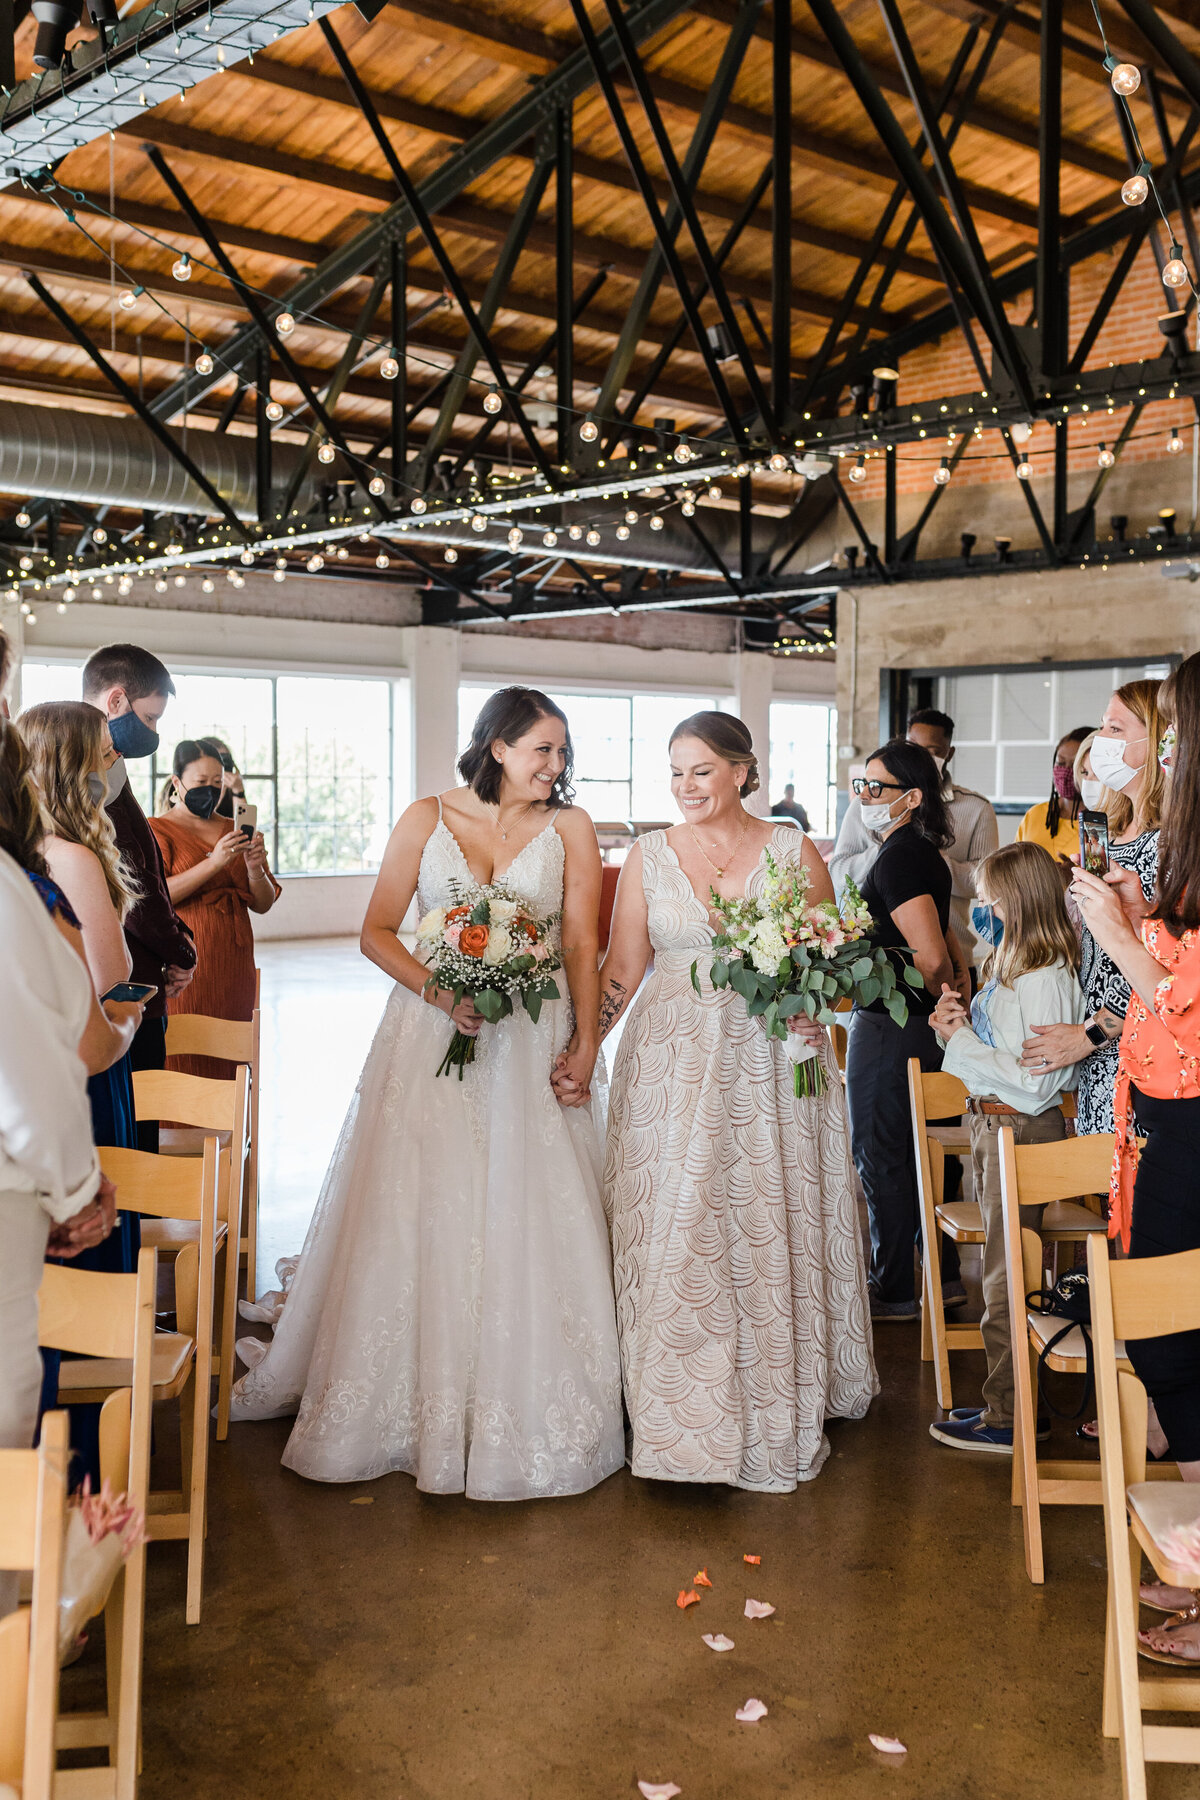 A candid shot of two brides walking down the aisle during their wedding ceremony at the Hickory Street Annex in Dallas, Texas. Both brides are wearing intricate, white dresses and are both holding bouquets. They are looking at each other and smiling joyfully. Many guests can be seen on either side of them.